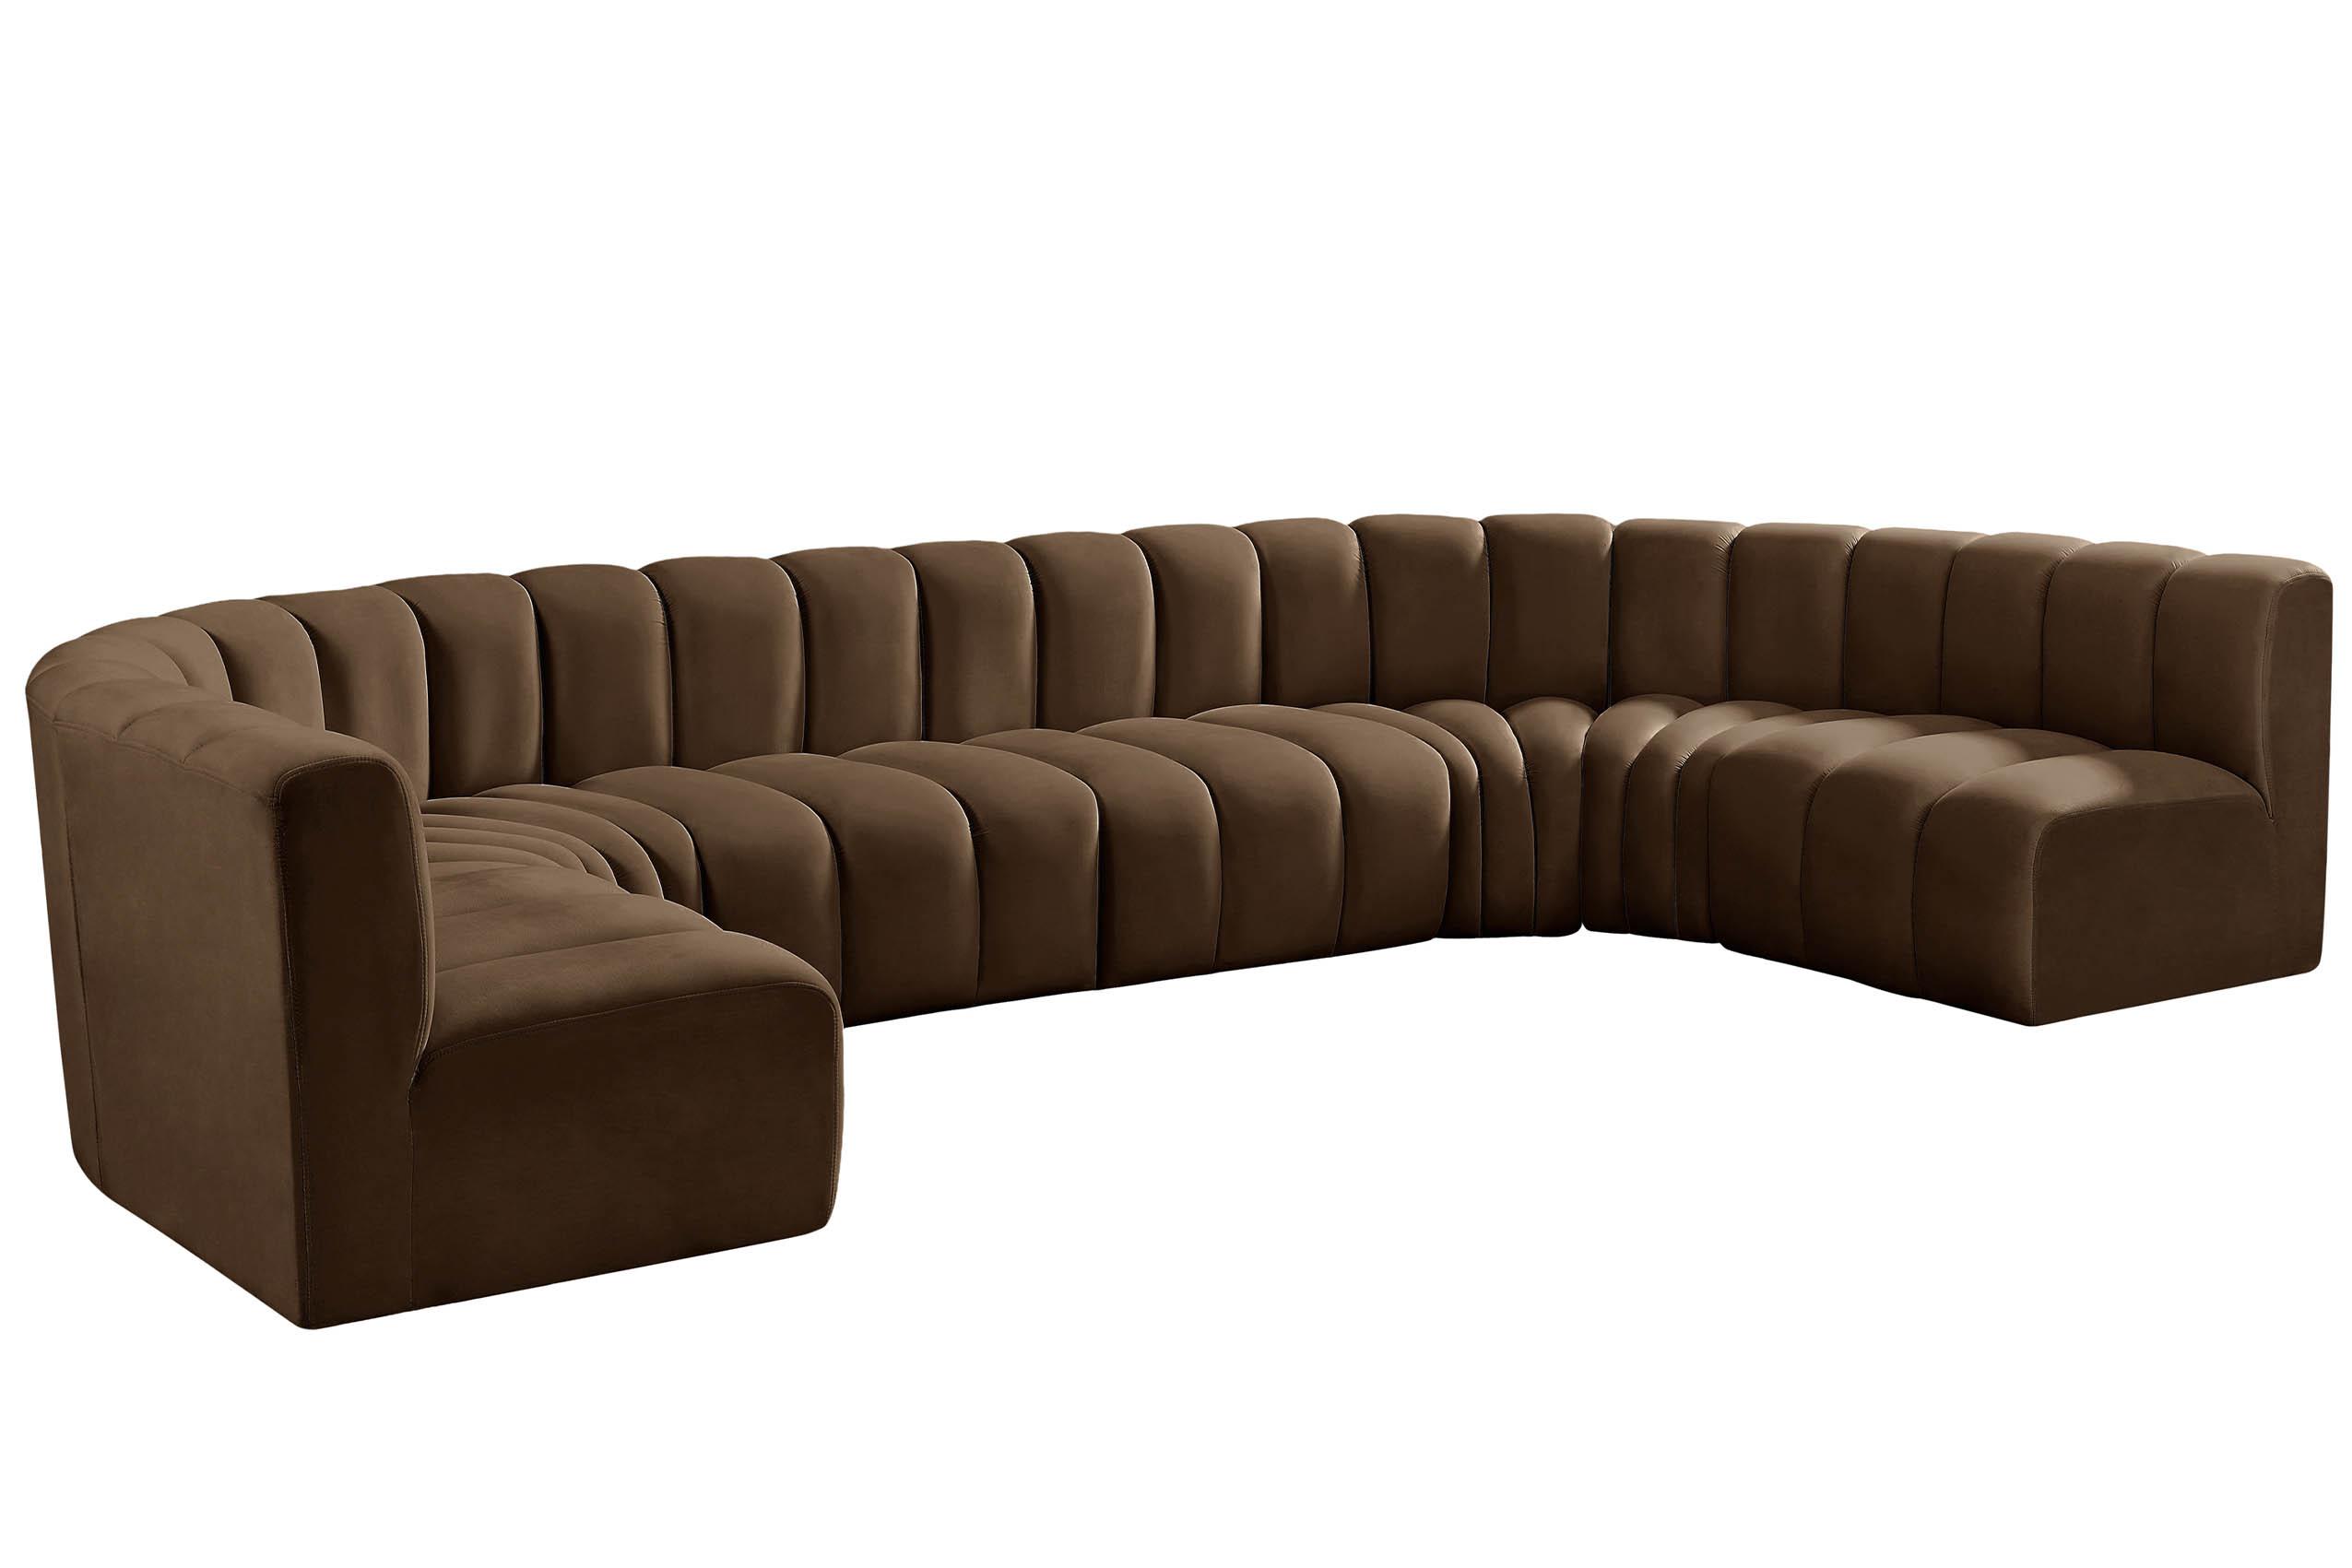 Contemporary, Modern Modular Sectional Sofa ARC 103Brown-S8A 103Brown-S8A in Brown Velvet